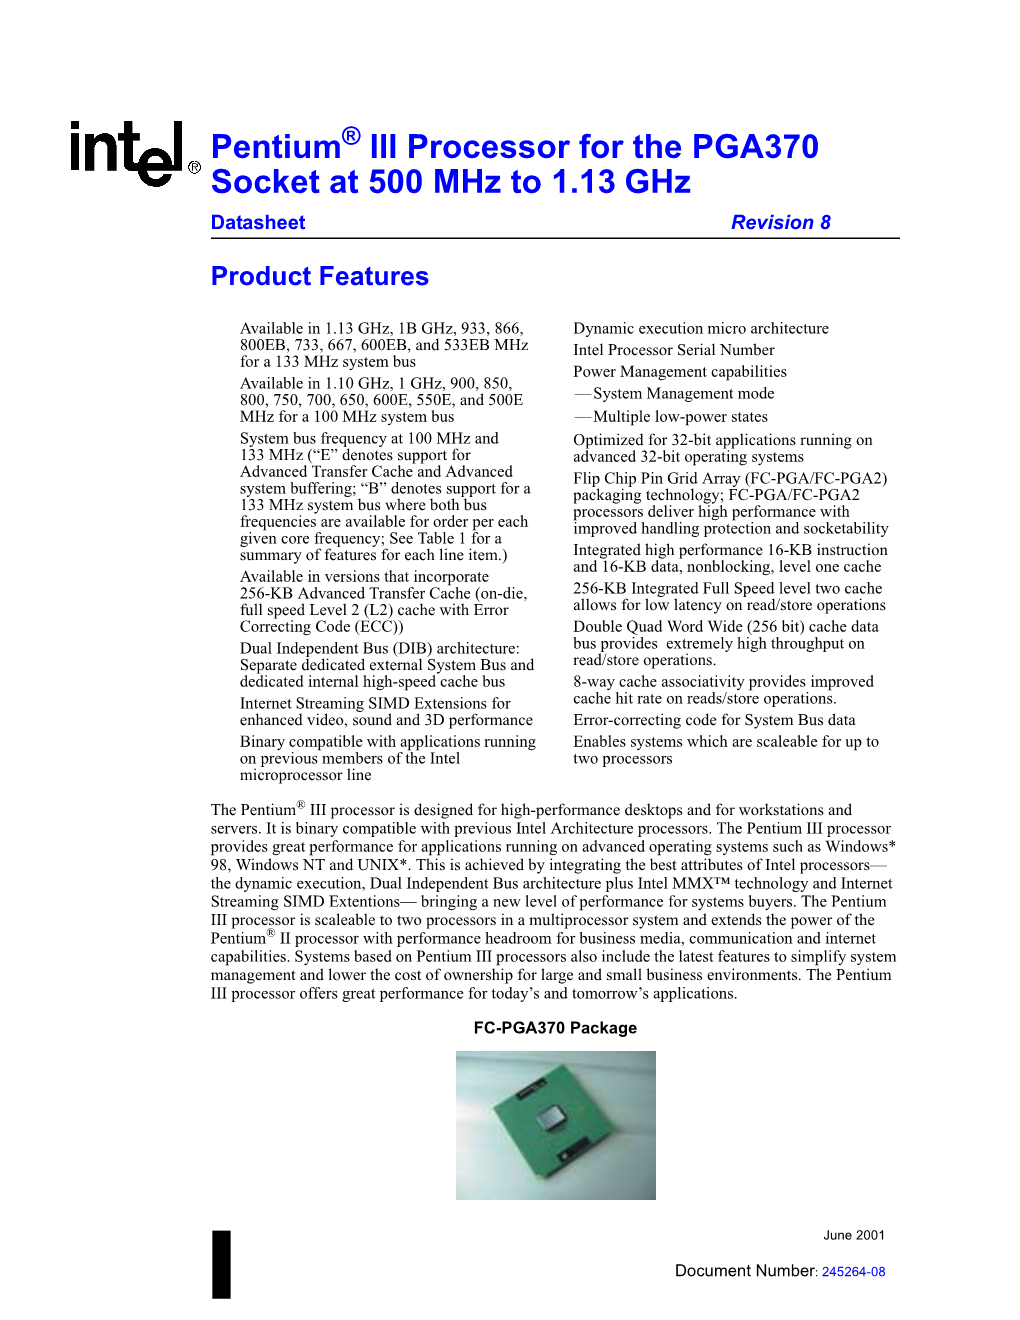 Pentium III Processor for the PGA370 Socket at 500 Mhz to 1.13